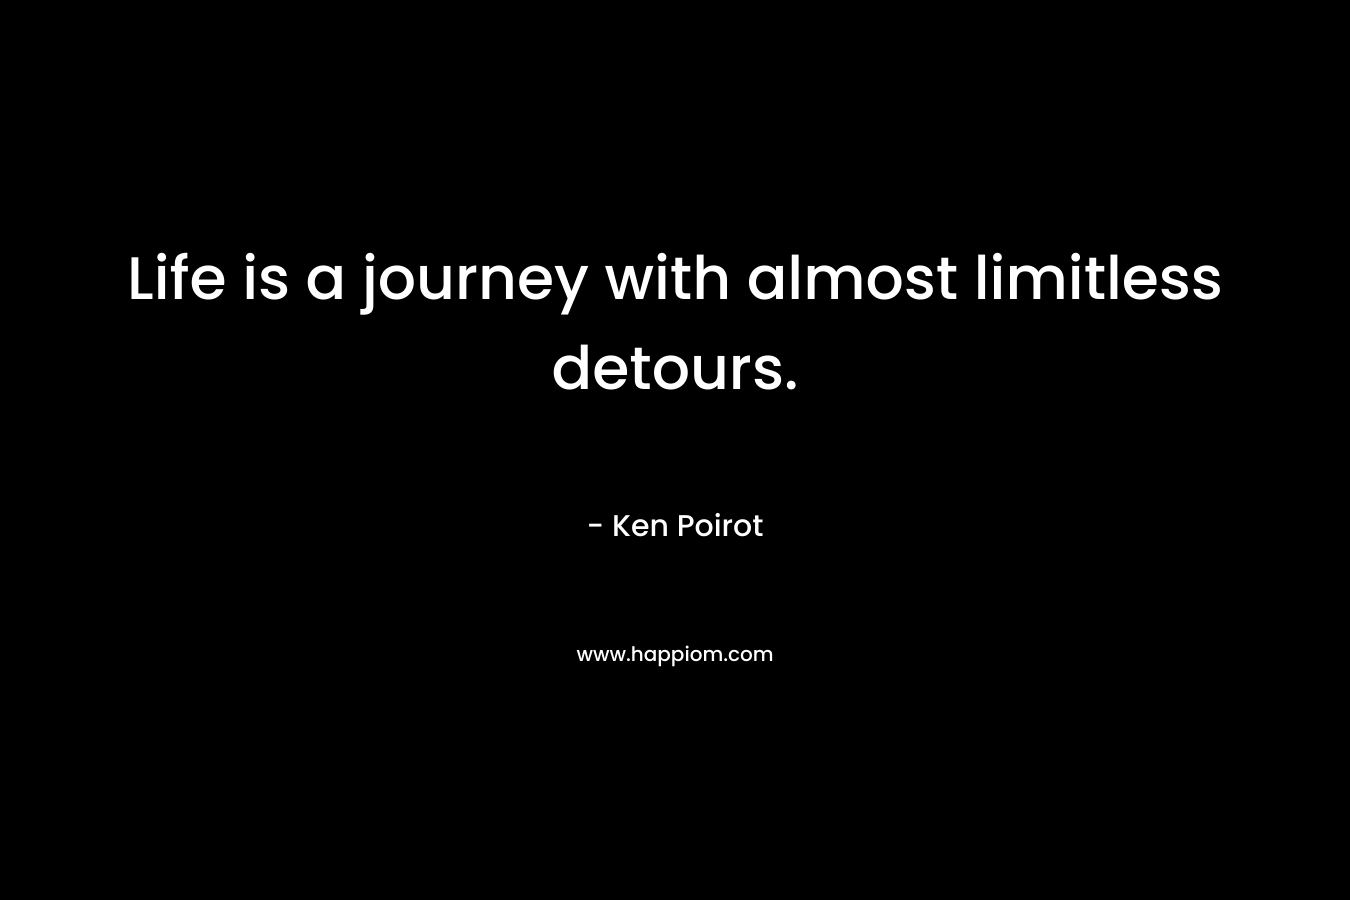 Life is a journey with almost limitless detours. – Ken Poirot